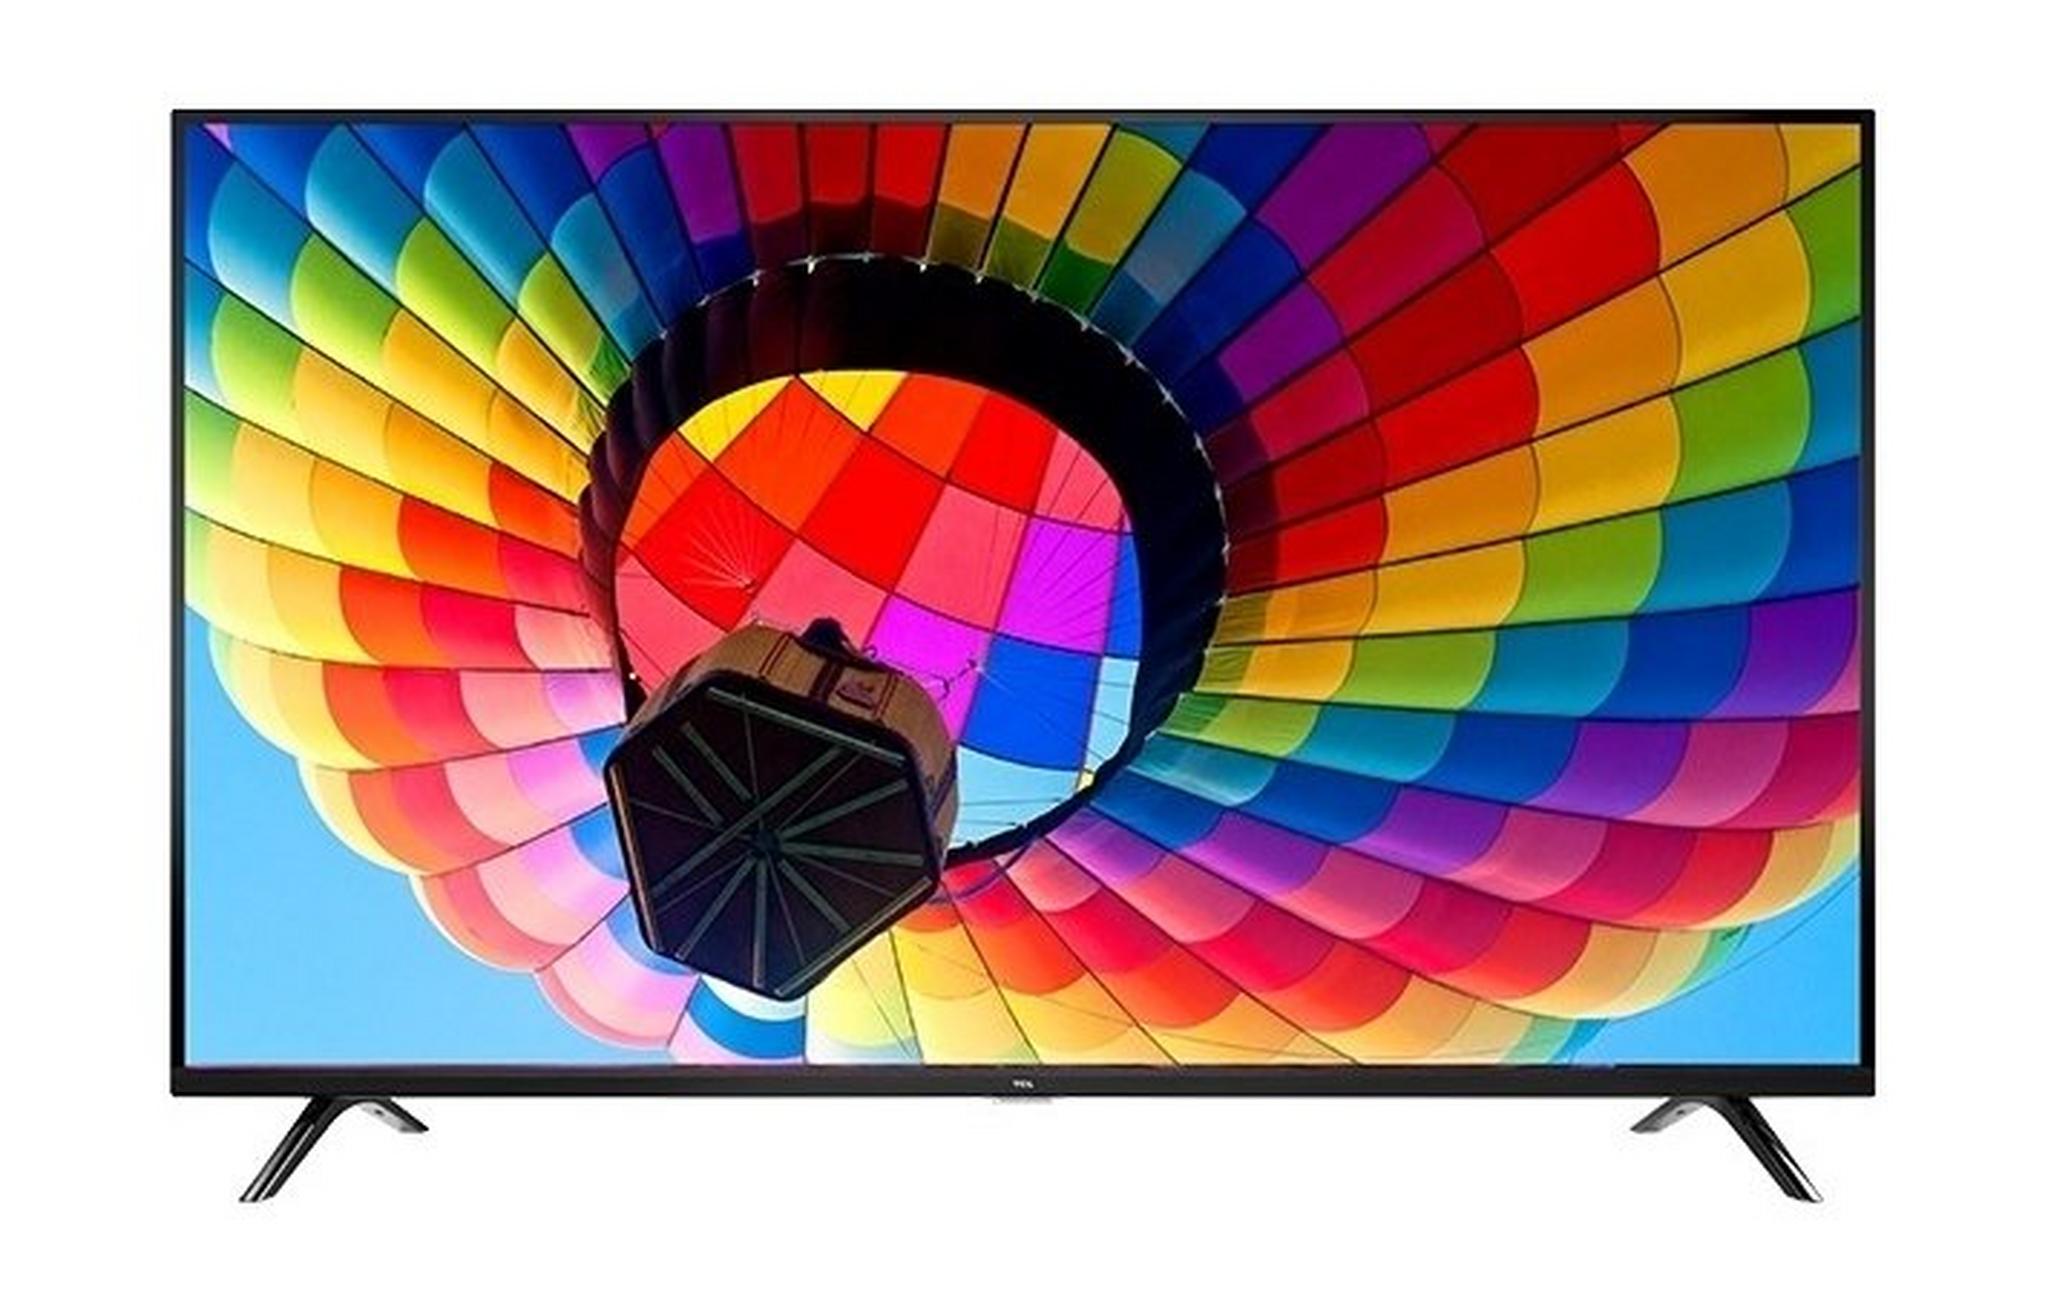 TCL D3000 Series 40 Inch FHD LED TV